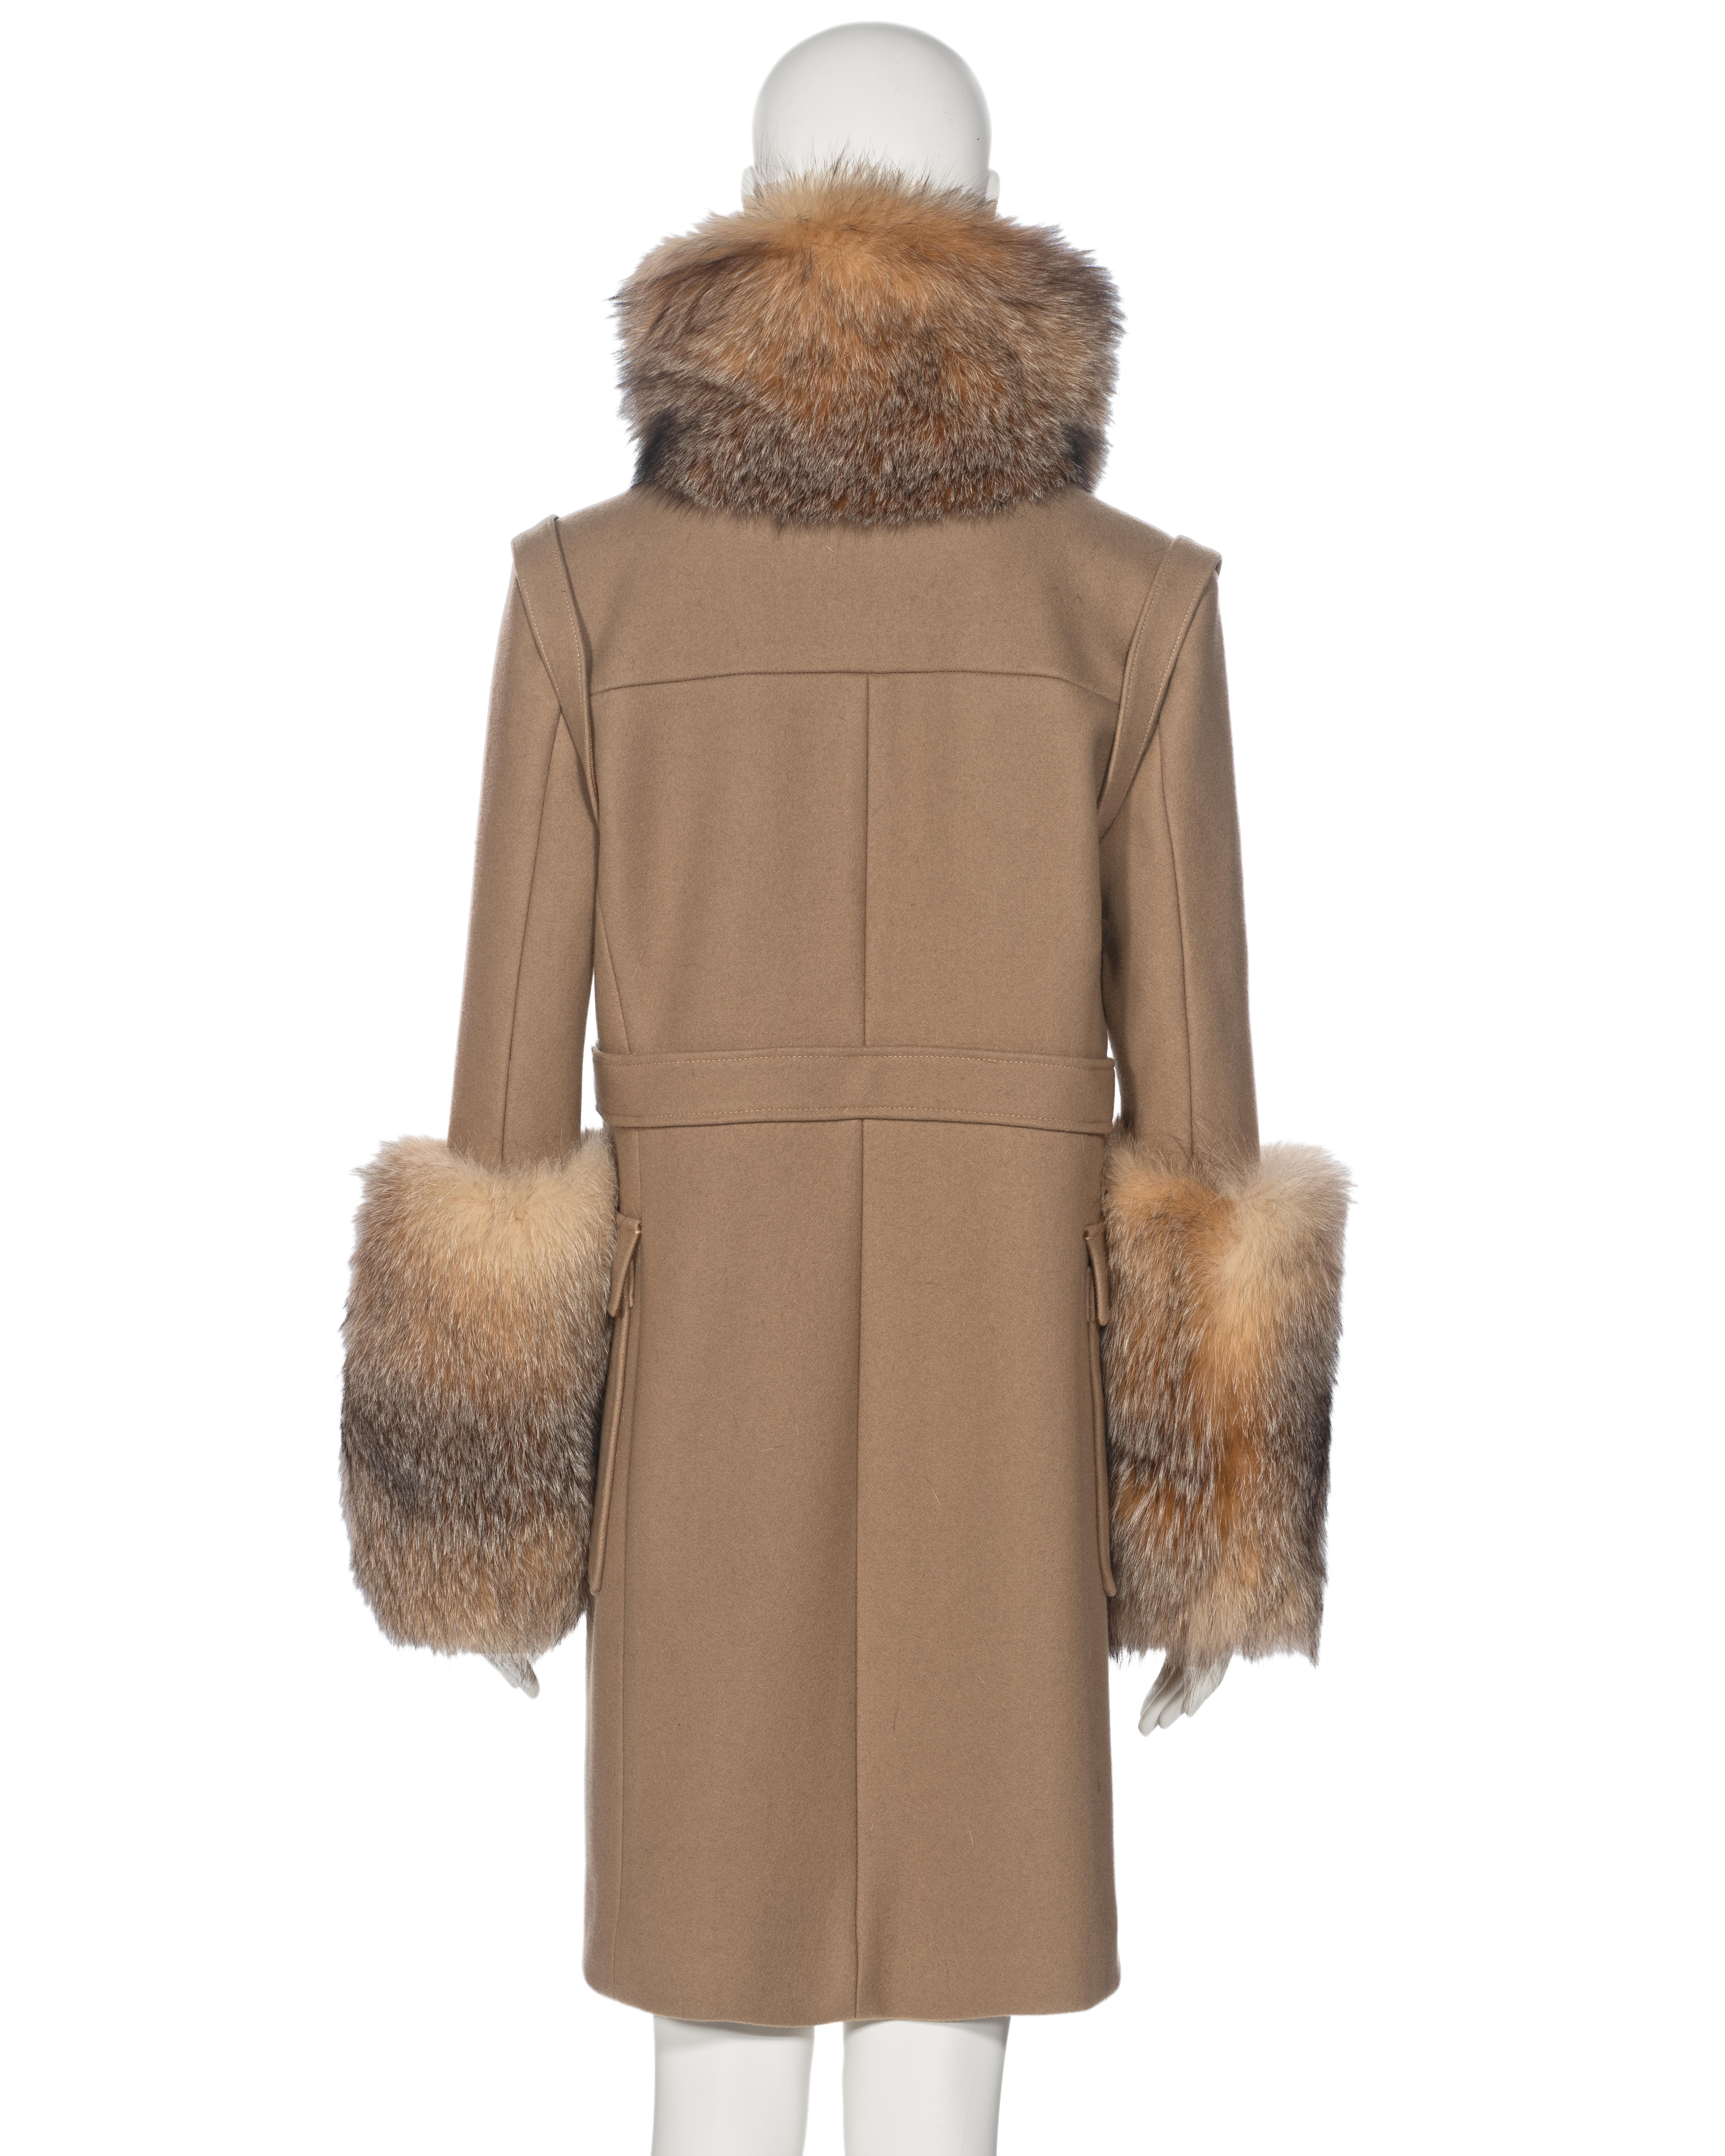 Balenciaga by Nicolas Ghesquière Fur-Trimmed Felted Wool Duffle Coat, fw 2005 For Sale 10